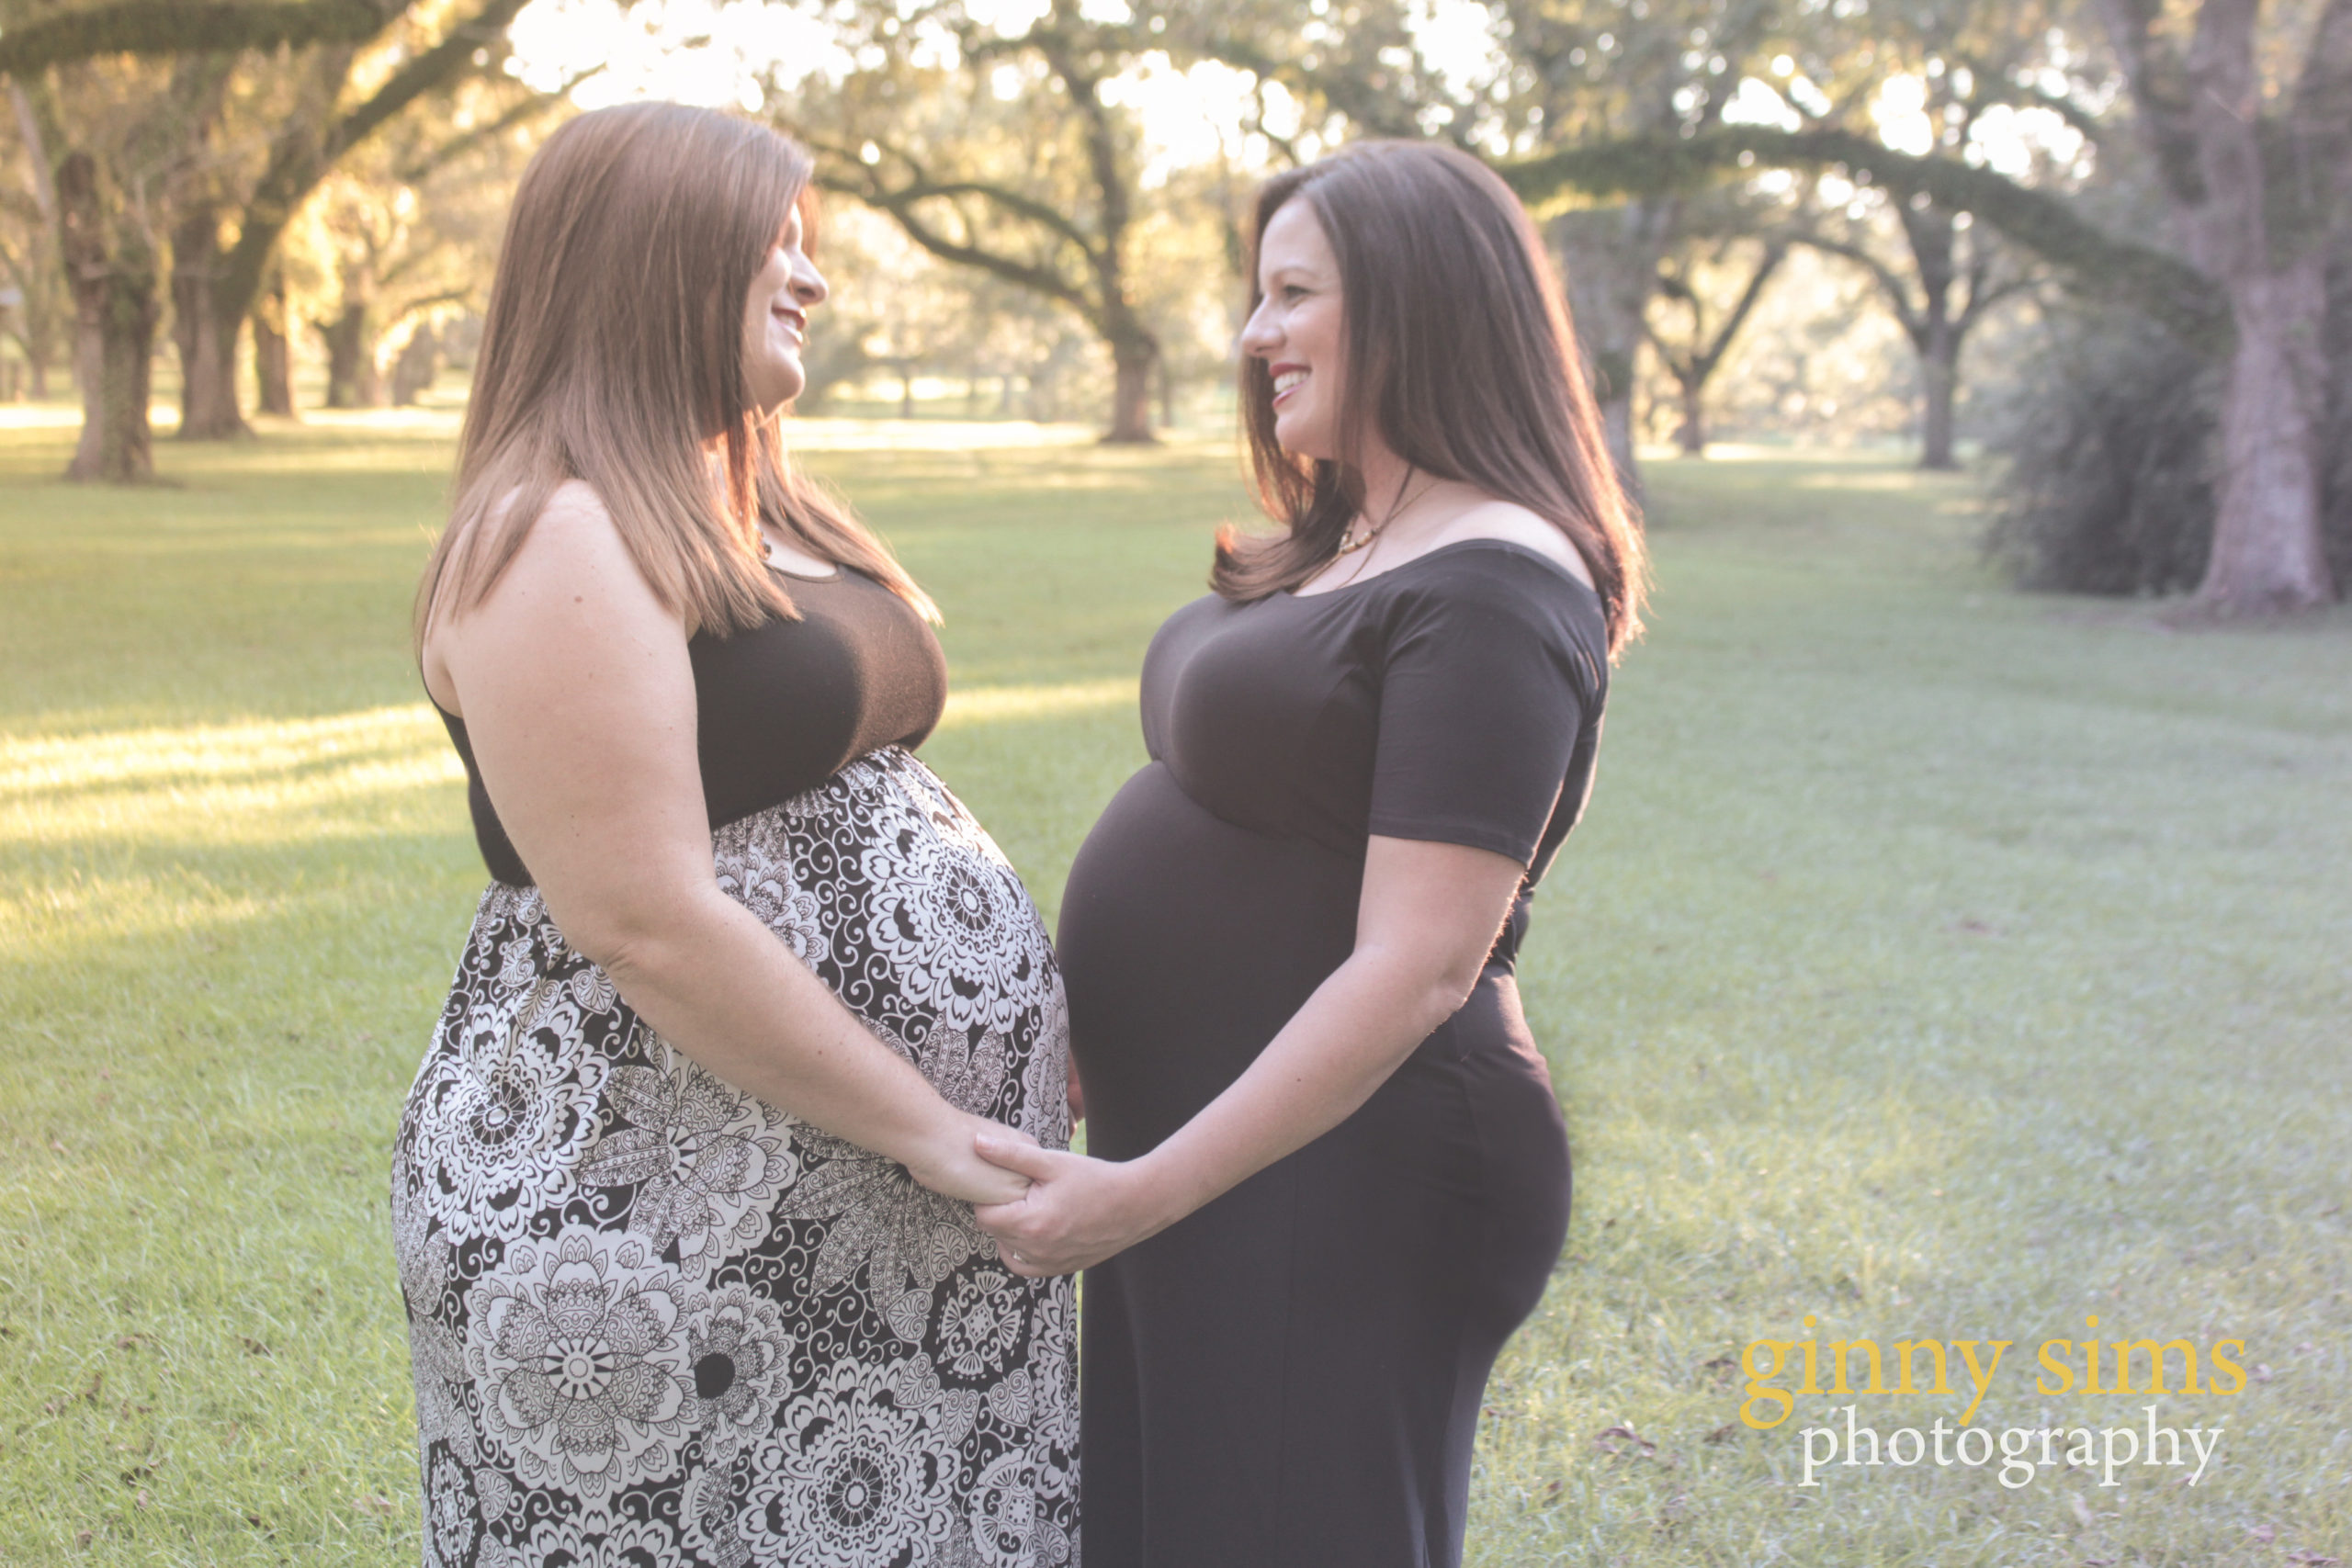 This woman and her wife are both pregnant—and due on the same day ❤️ pic